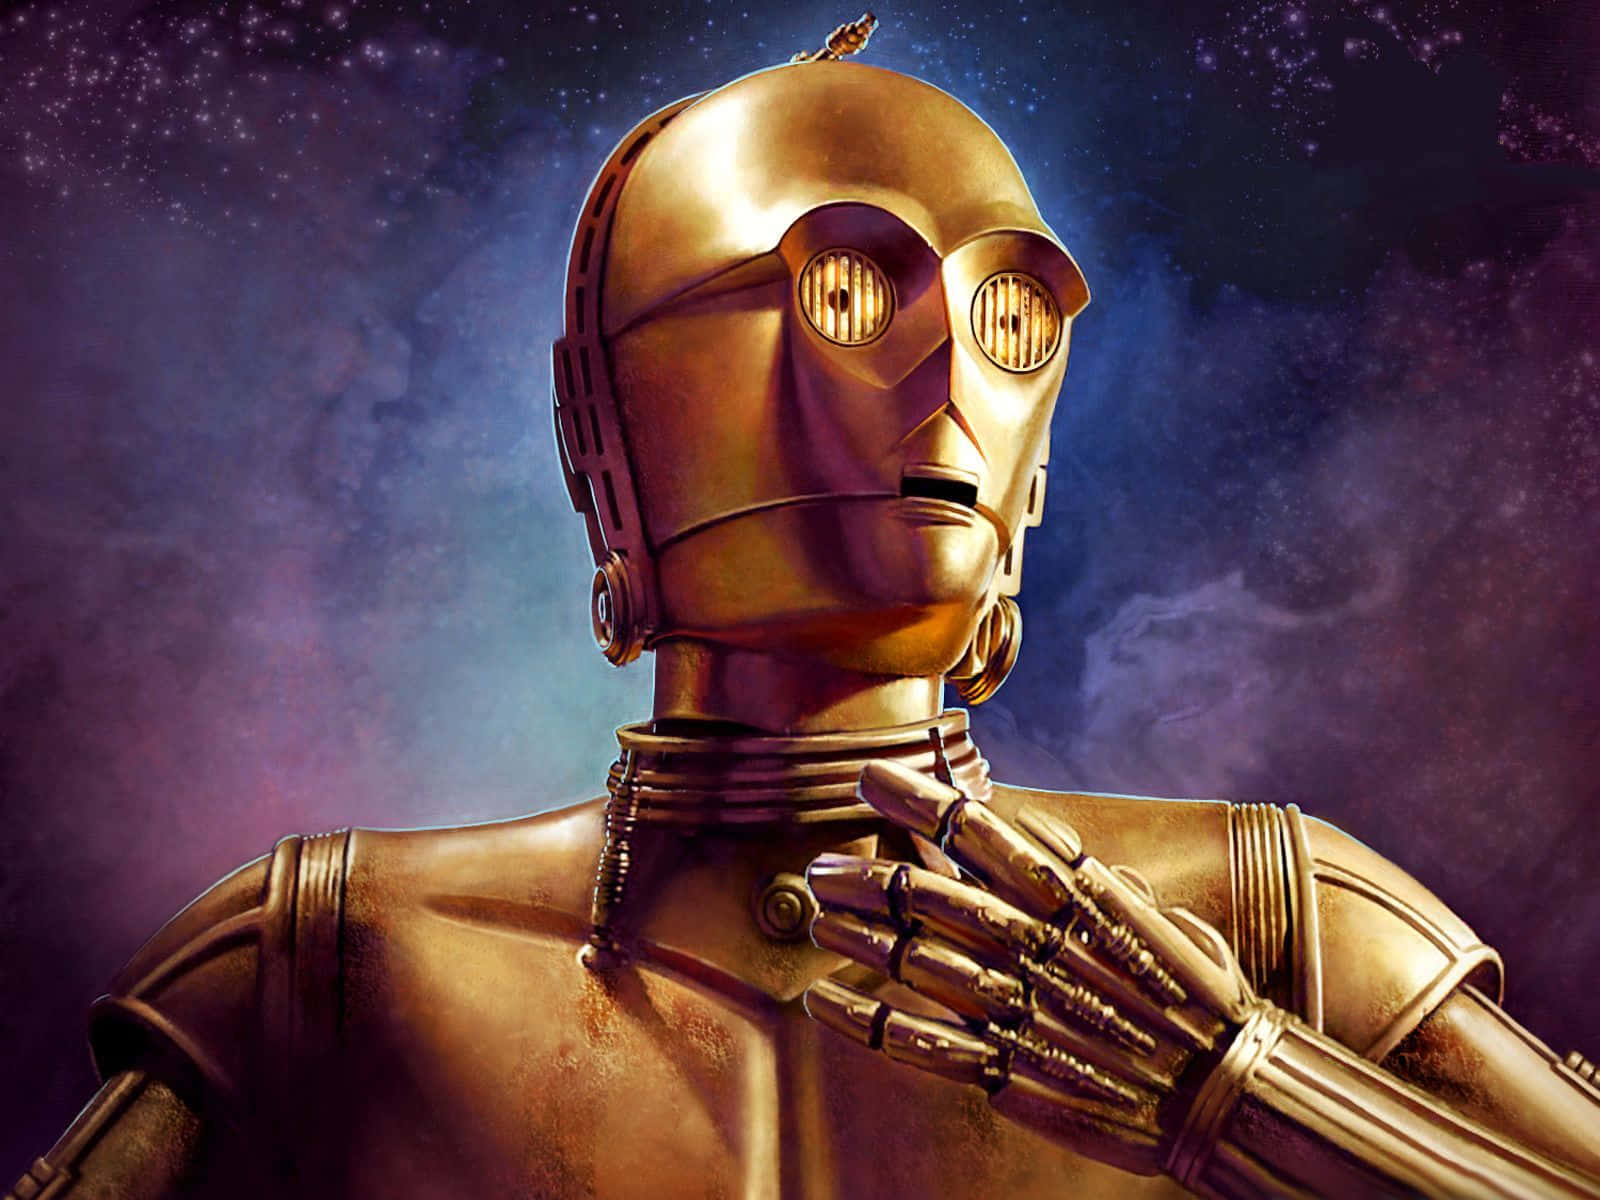 A detailed close-up of the beloved Star Wars droid, C-3PO. Wallpaper